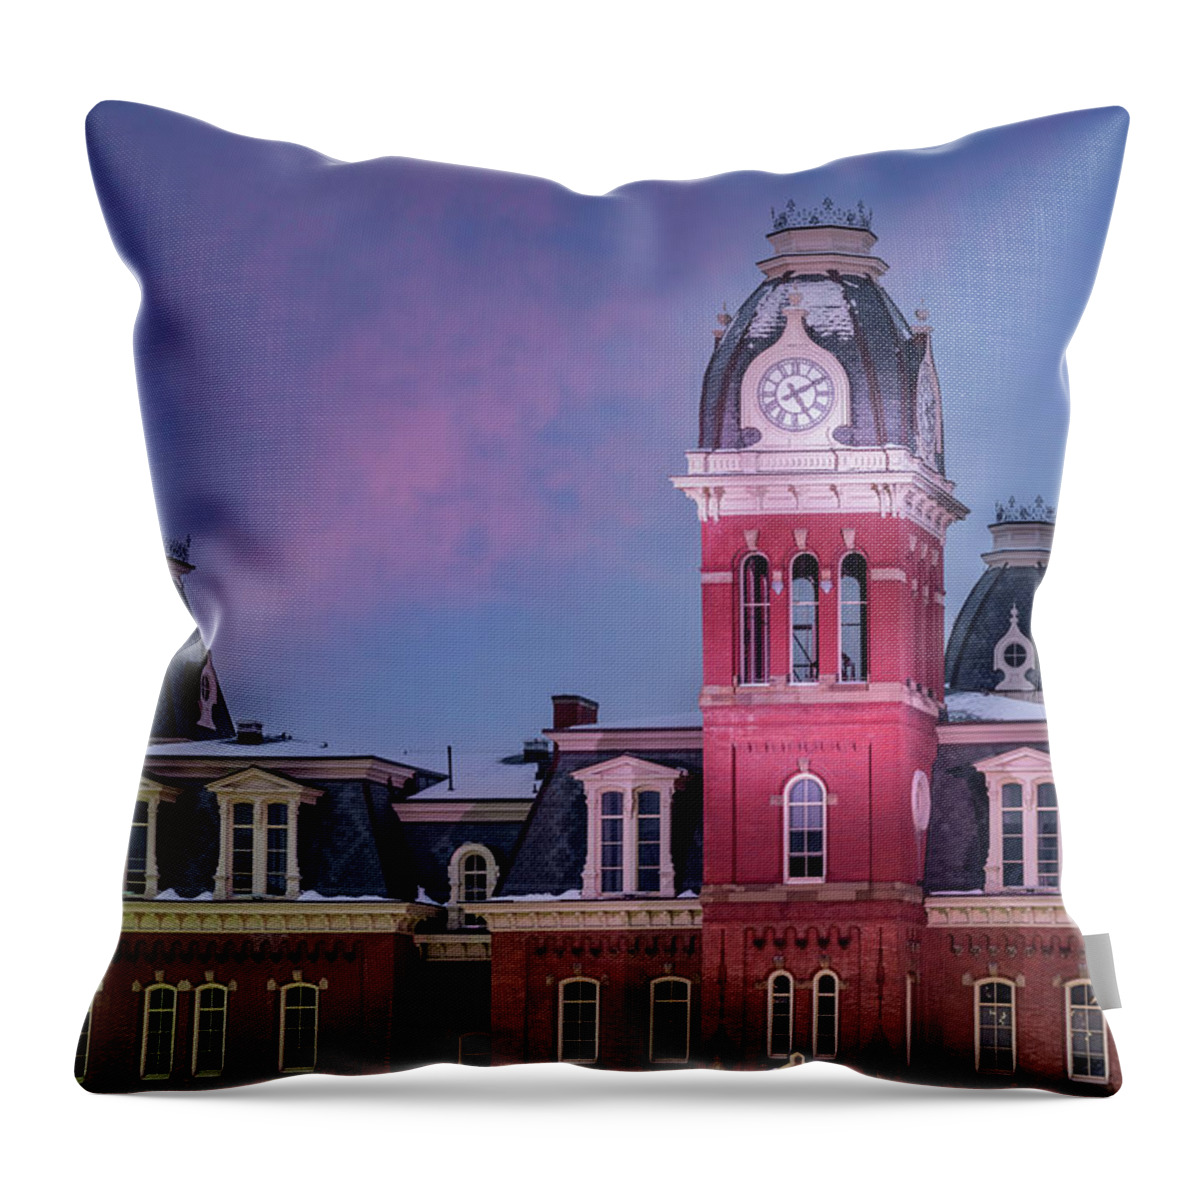 Graduation Throw Pillow featuring the photograph Clock Tower of Woodburn Hall at West Virginia University by Steven Heap